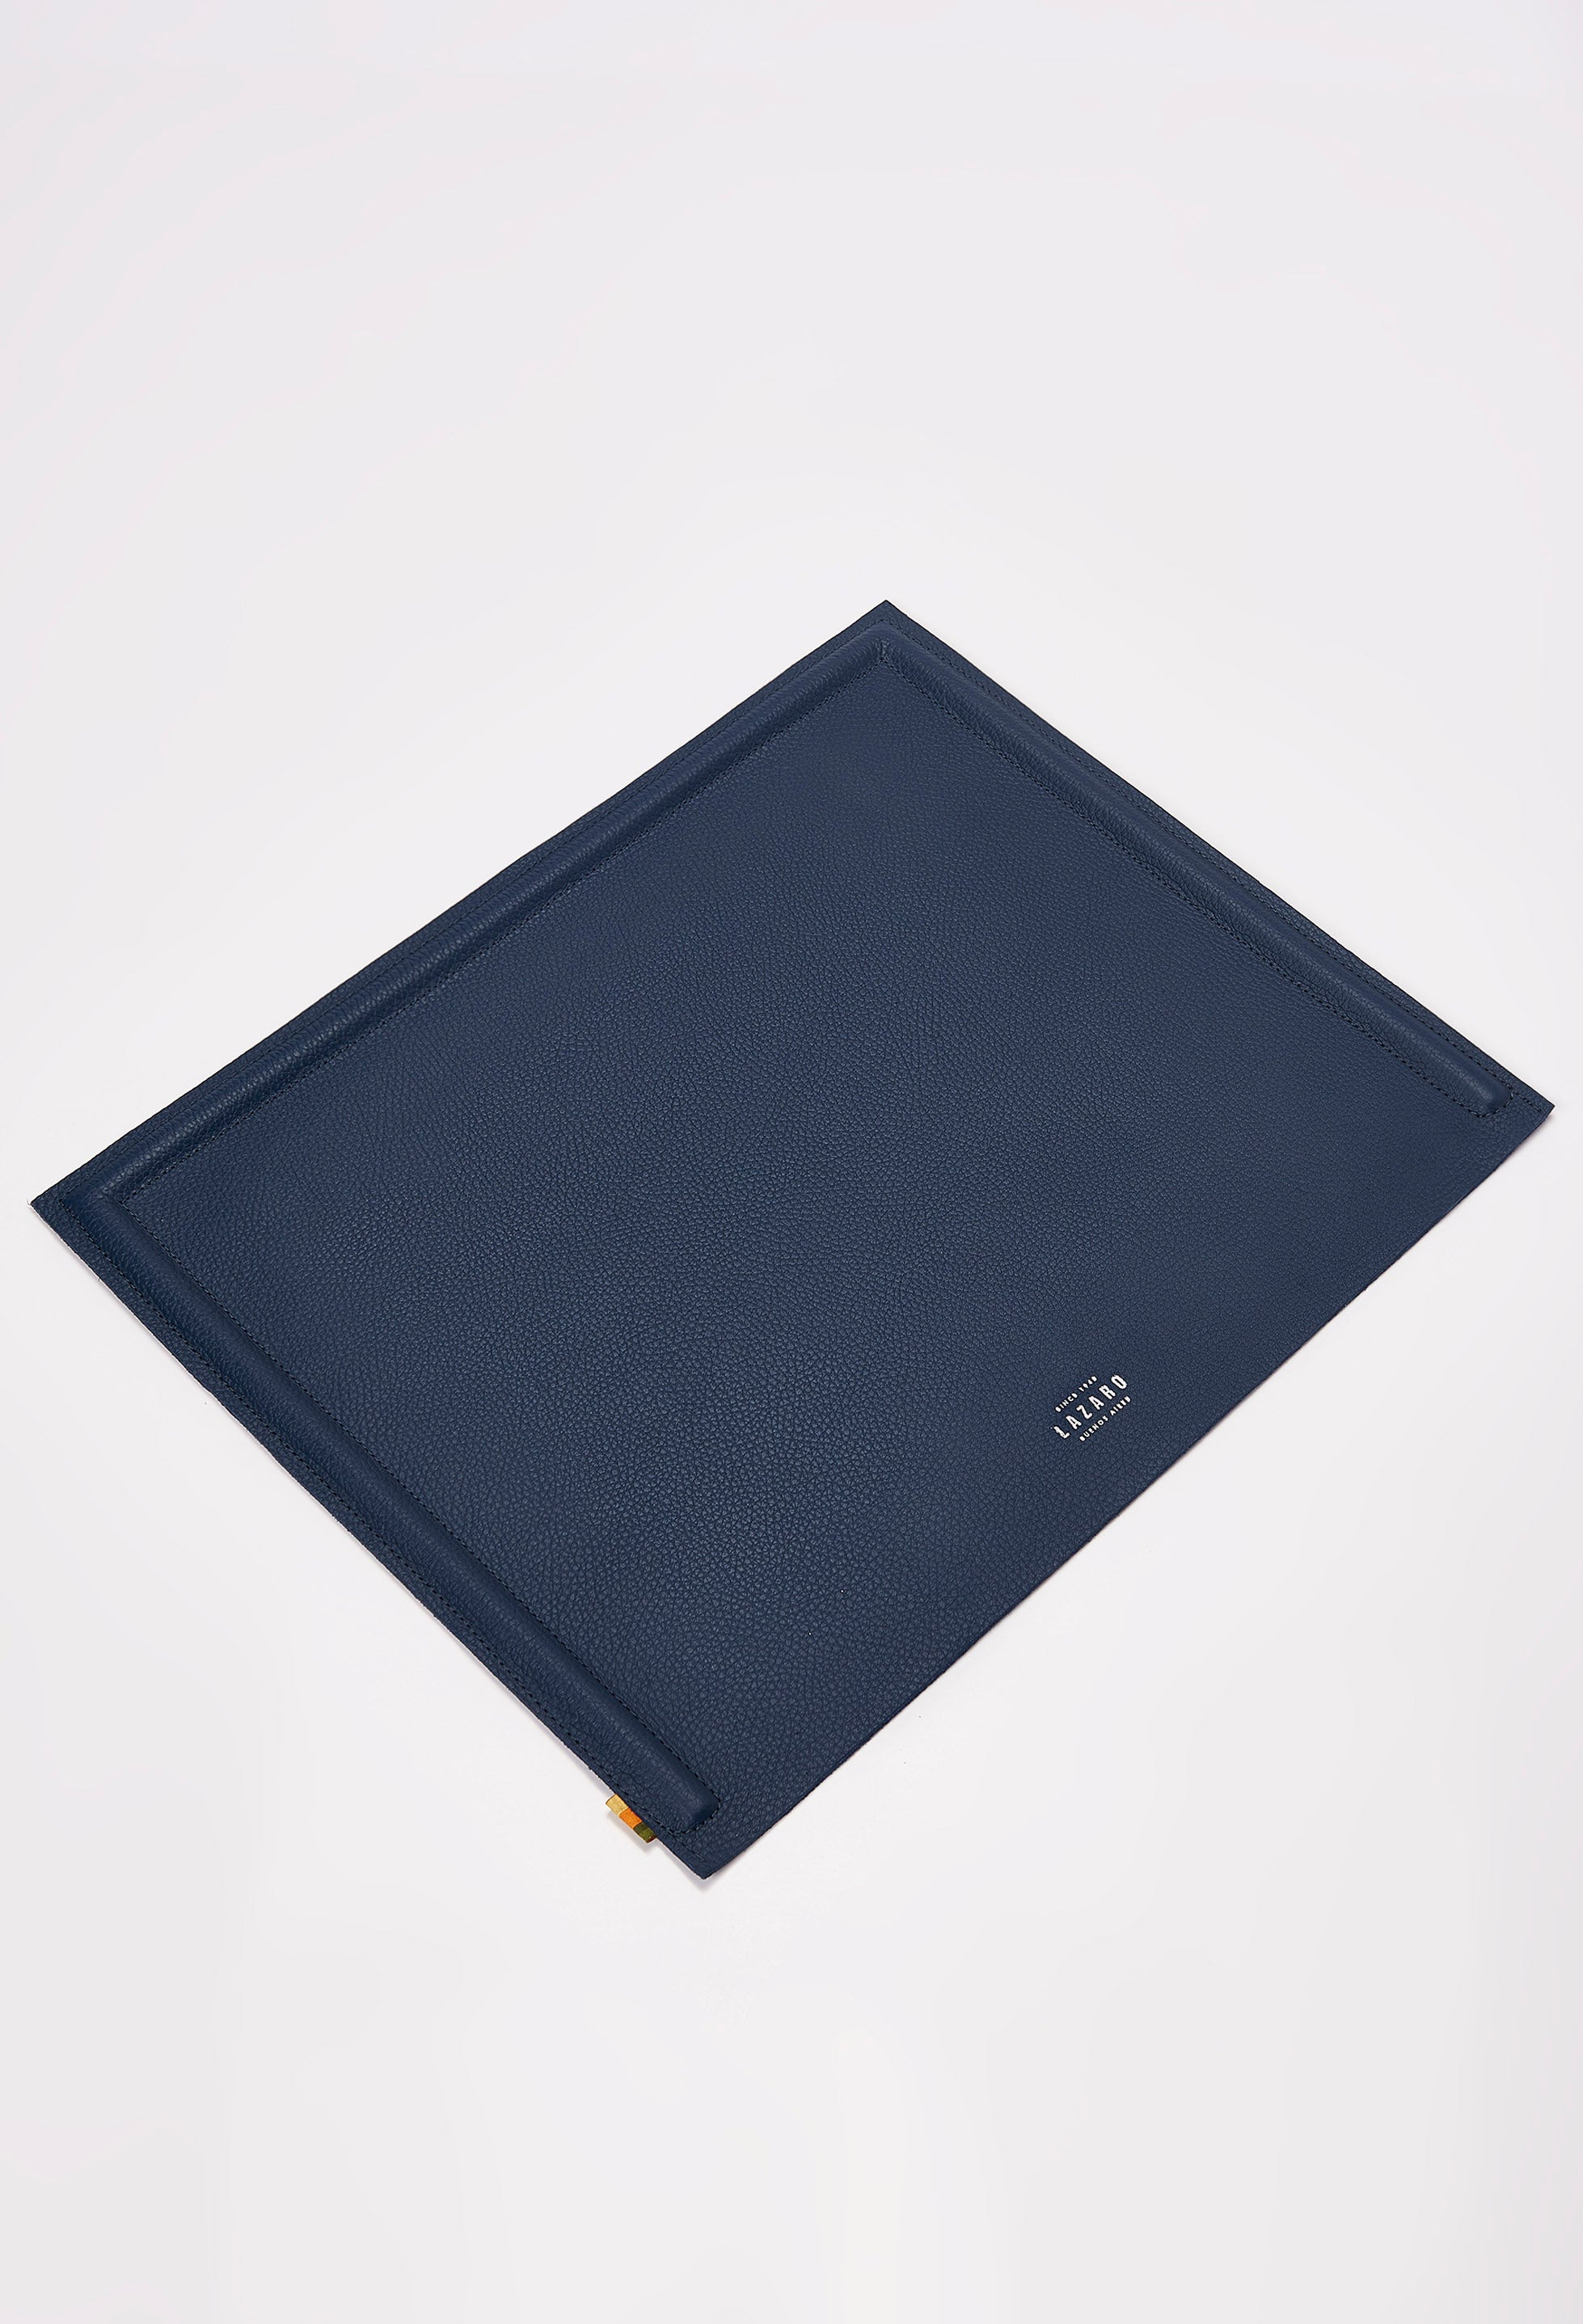 Front of a Blue Leather Minimalist Desk Mat with embossed Lazaro logo on it.